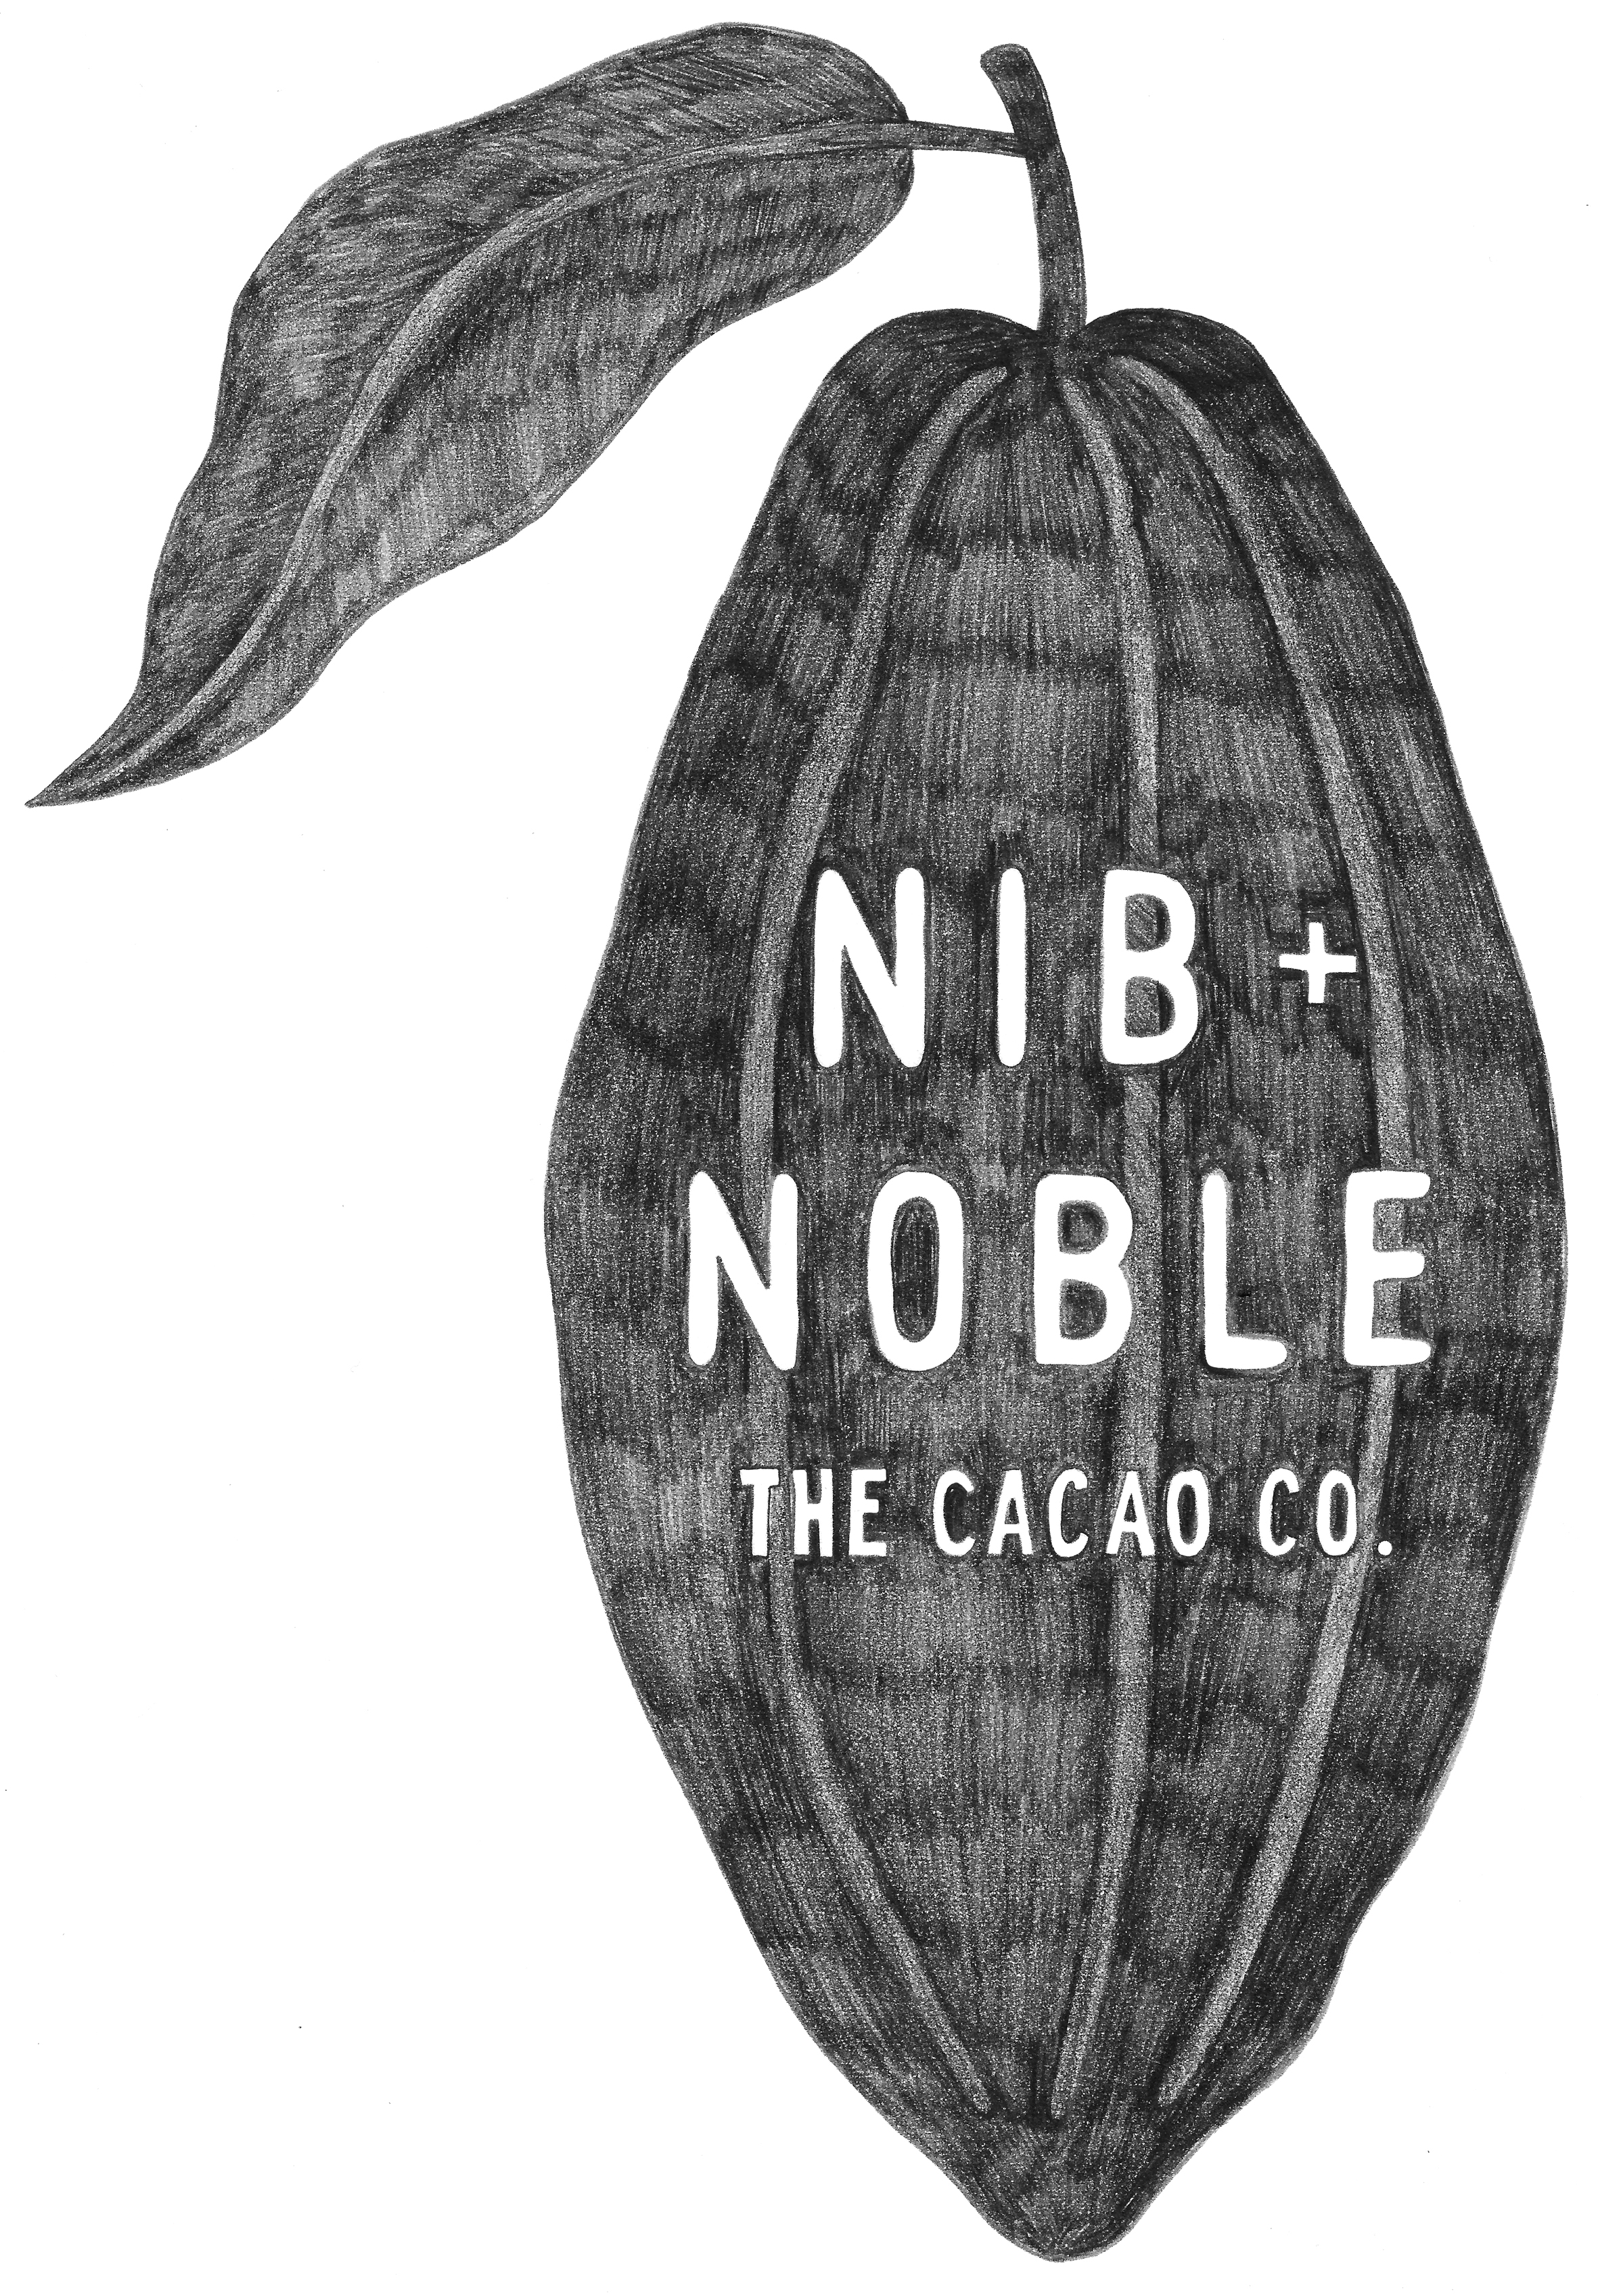 Nib and Noble organic hot chocolate, dairy free, plant based, gluten free, certified organic. Cacao powder and coconut sugar. Better for your body